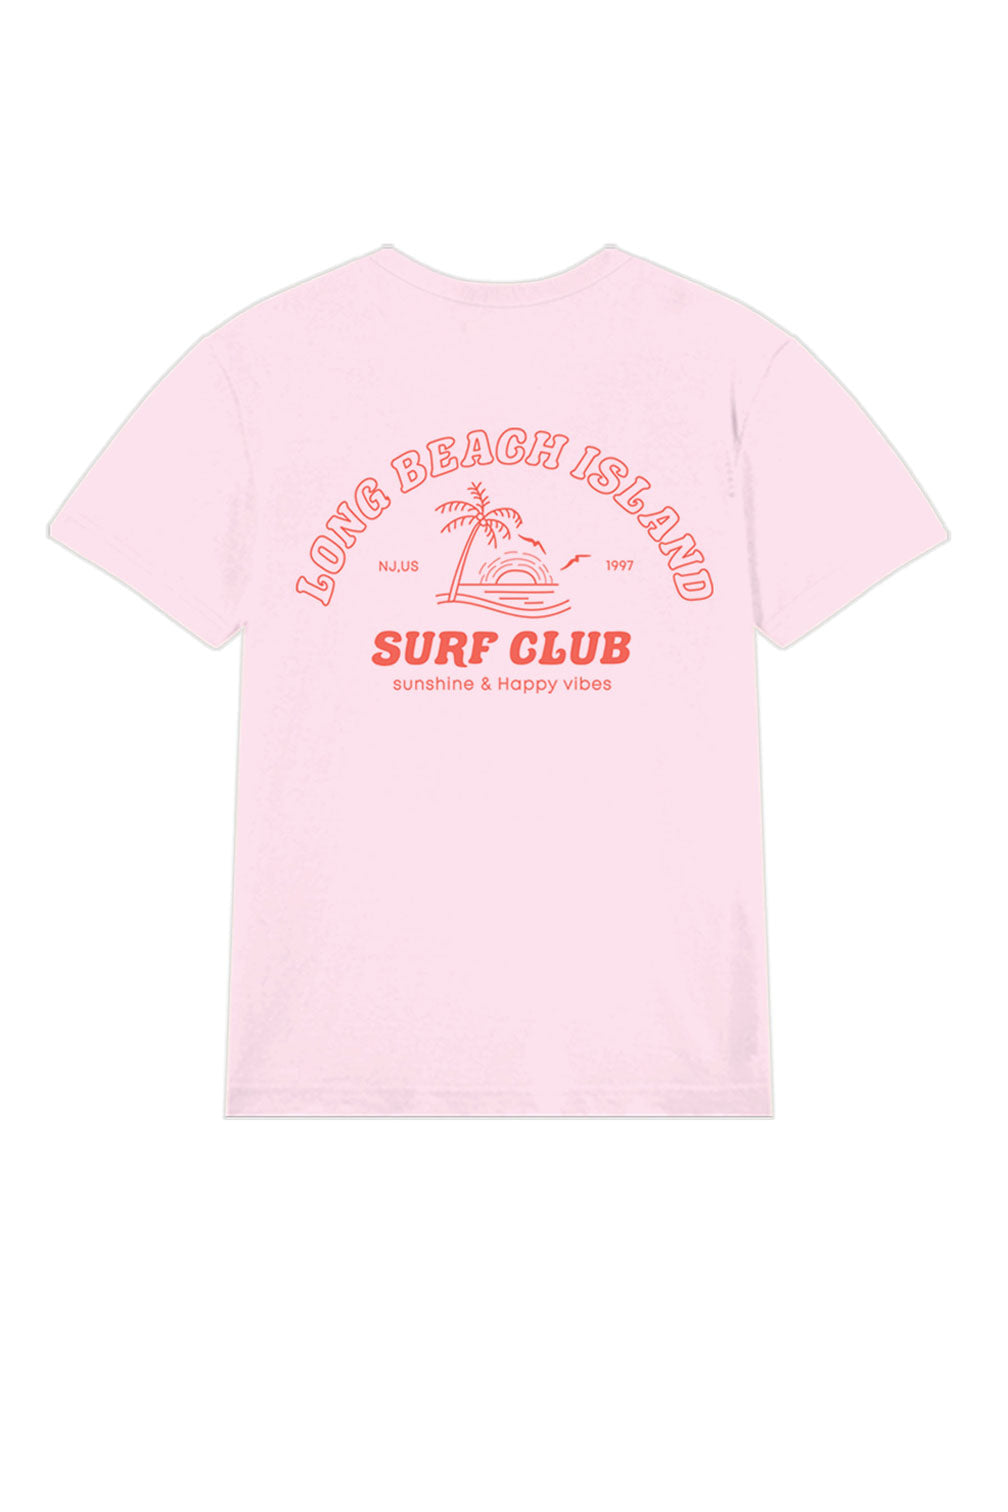 from The Surf Nj Logo T-Shirt